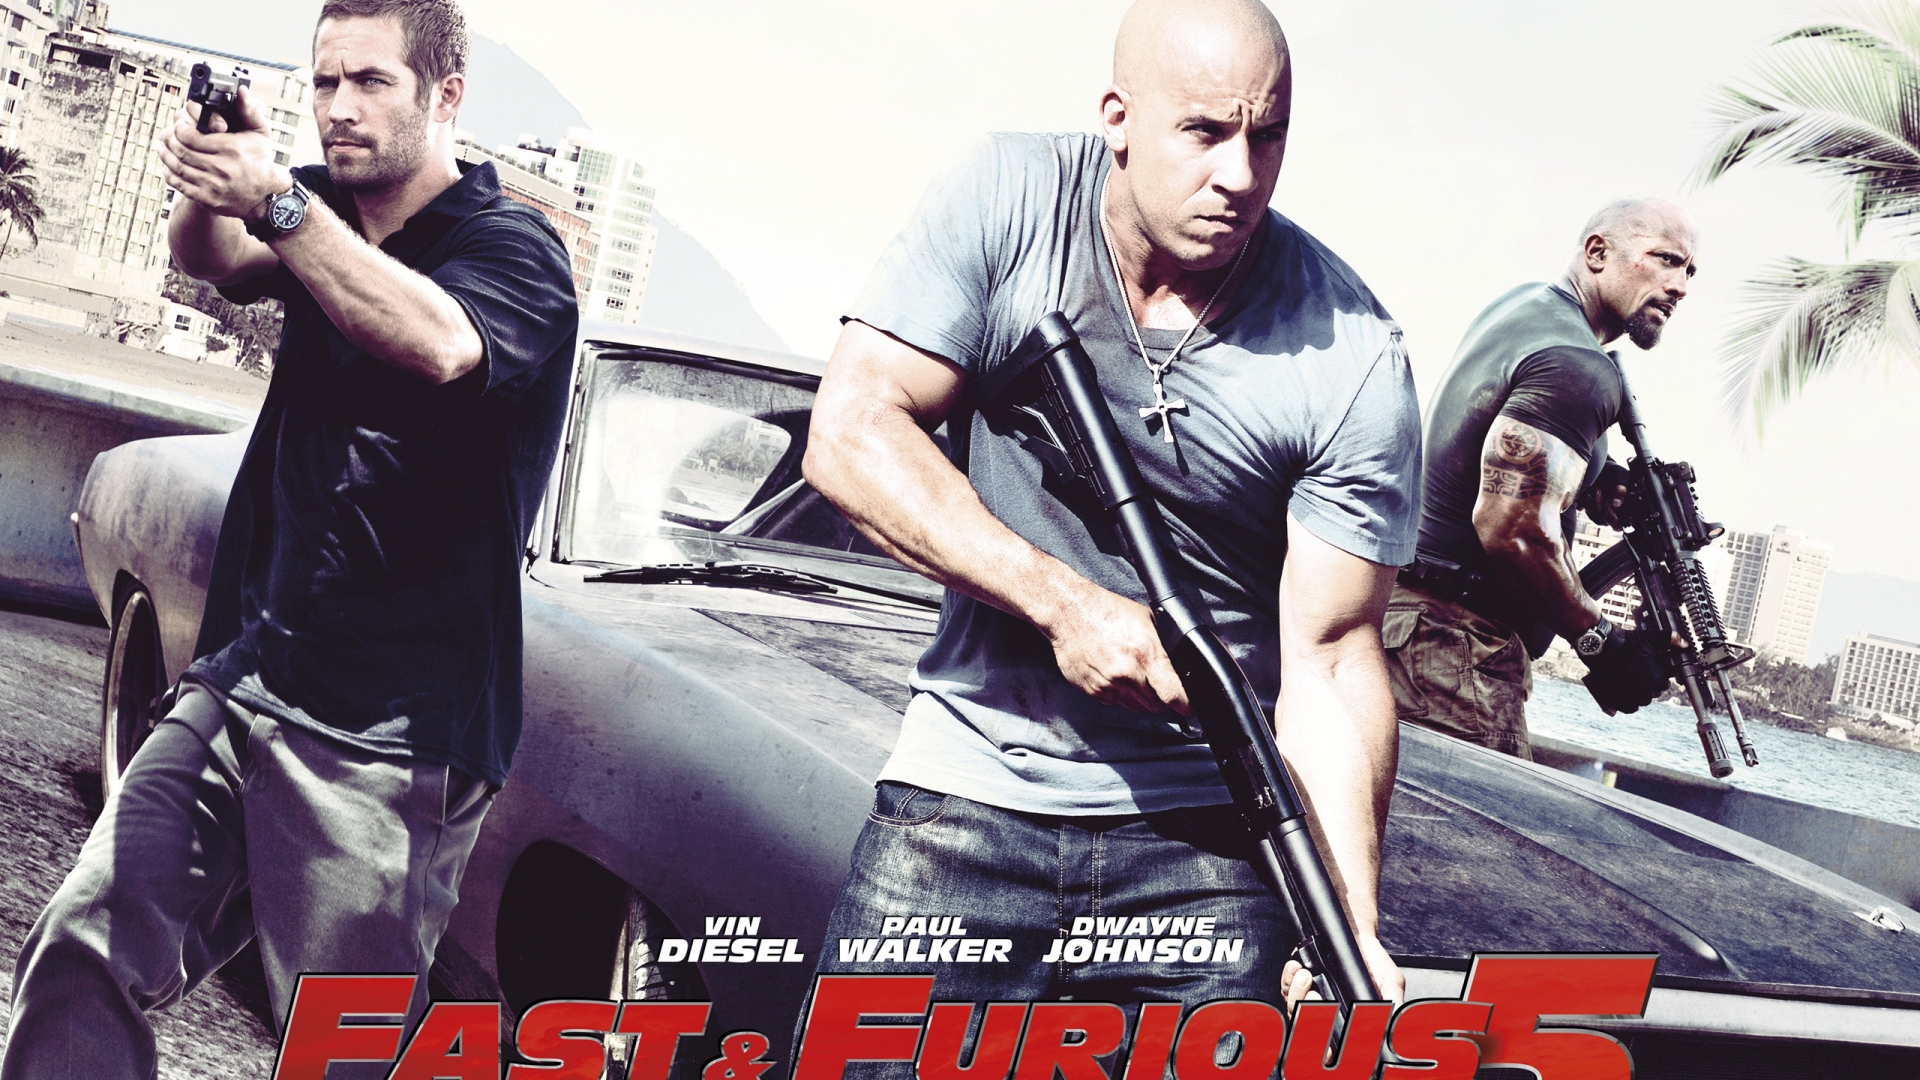 Fast and Furious 5 Movie for 1920 x 1080 HDTV 1080p resolution